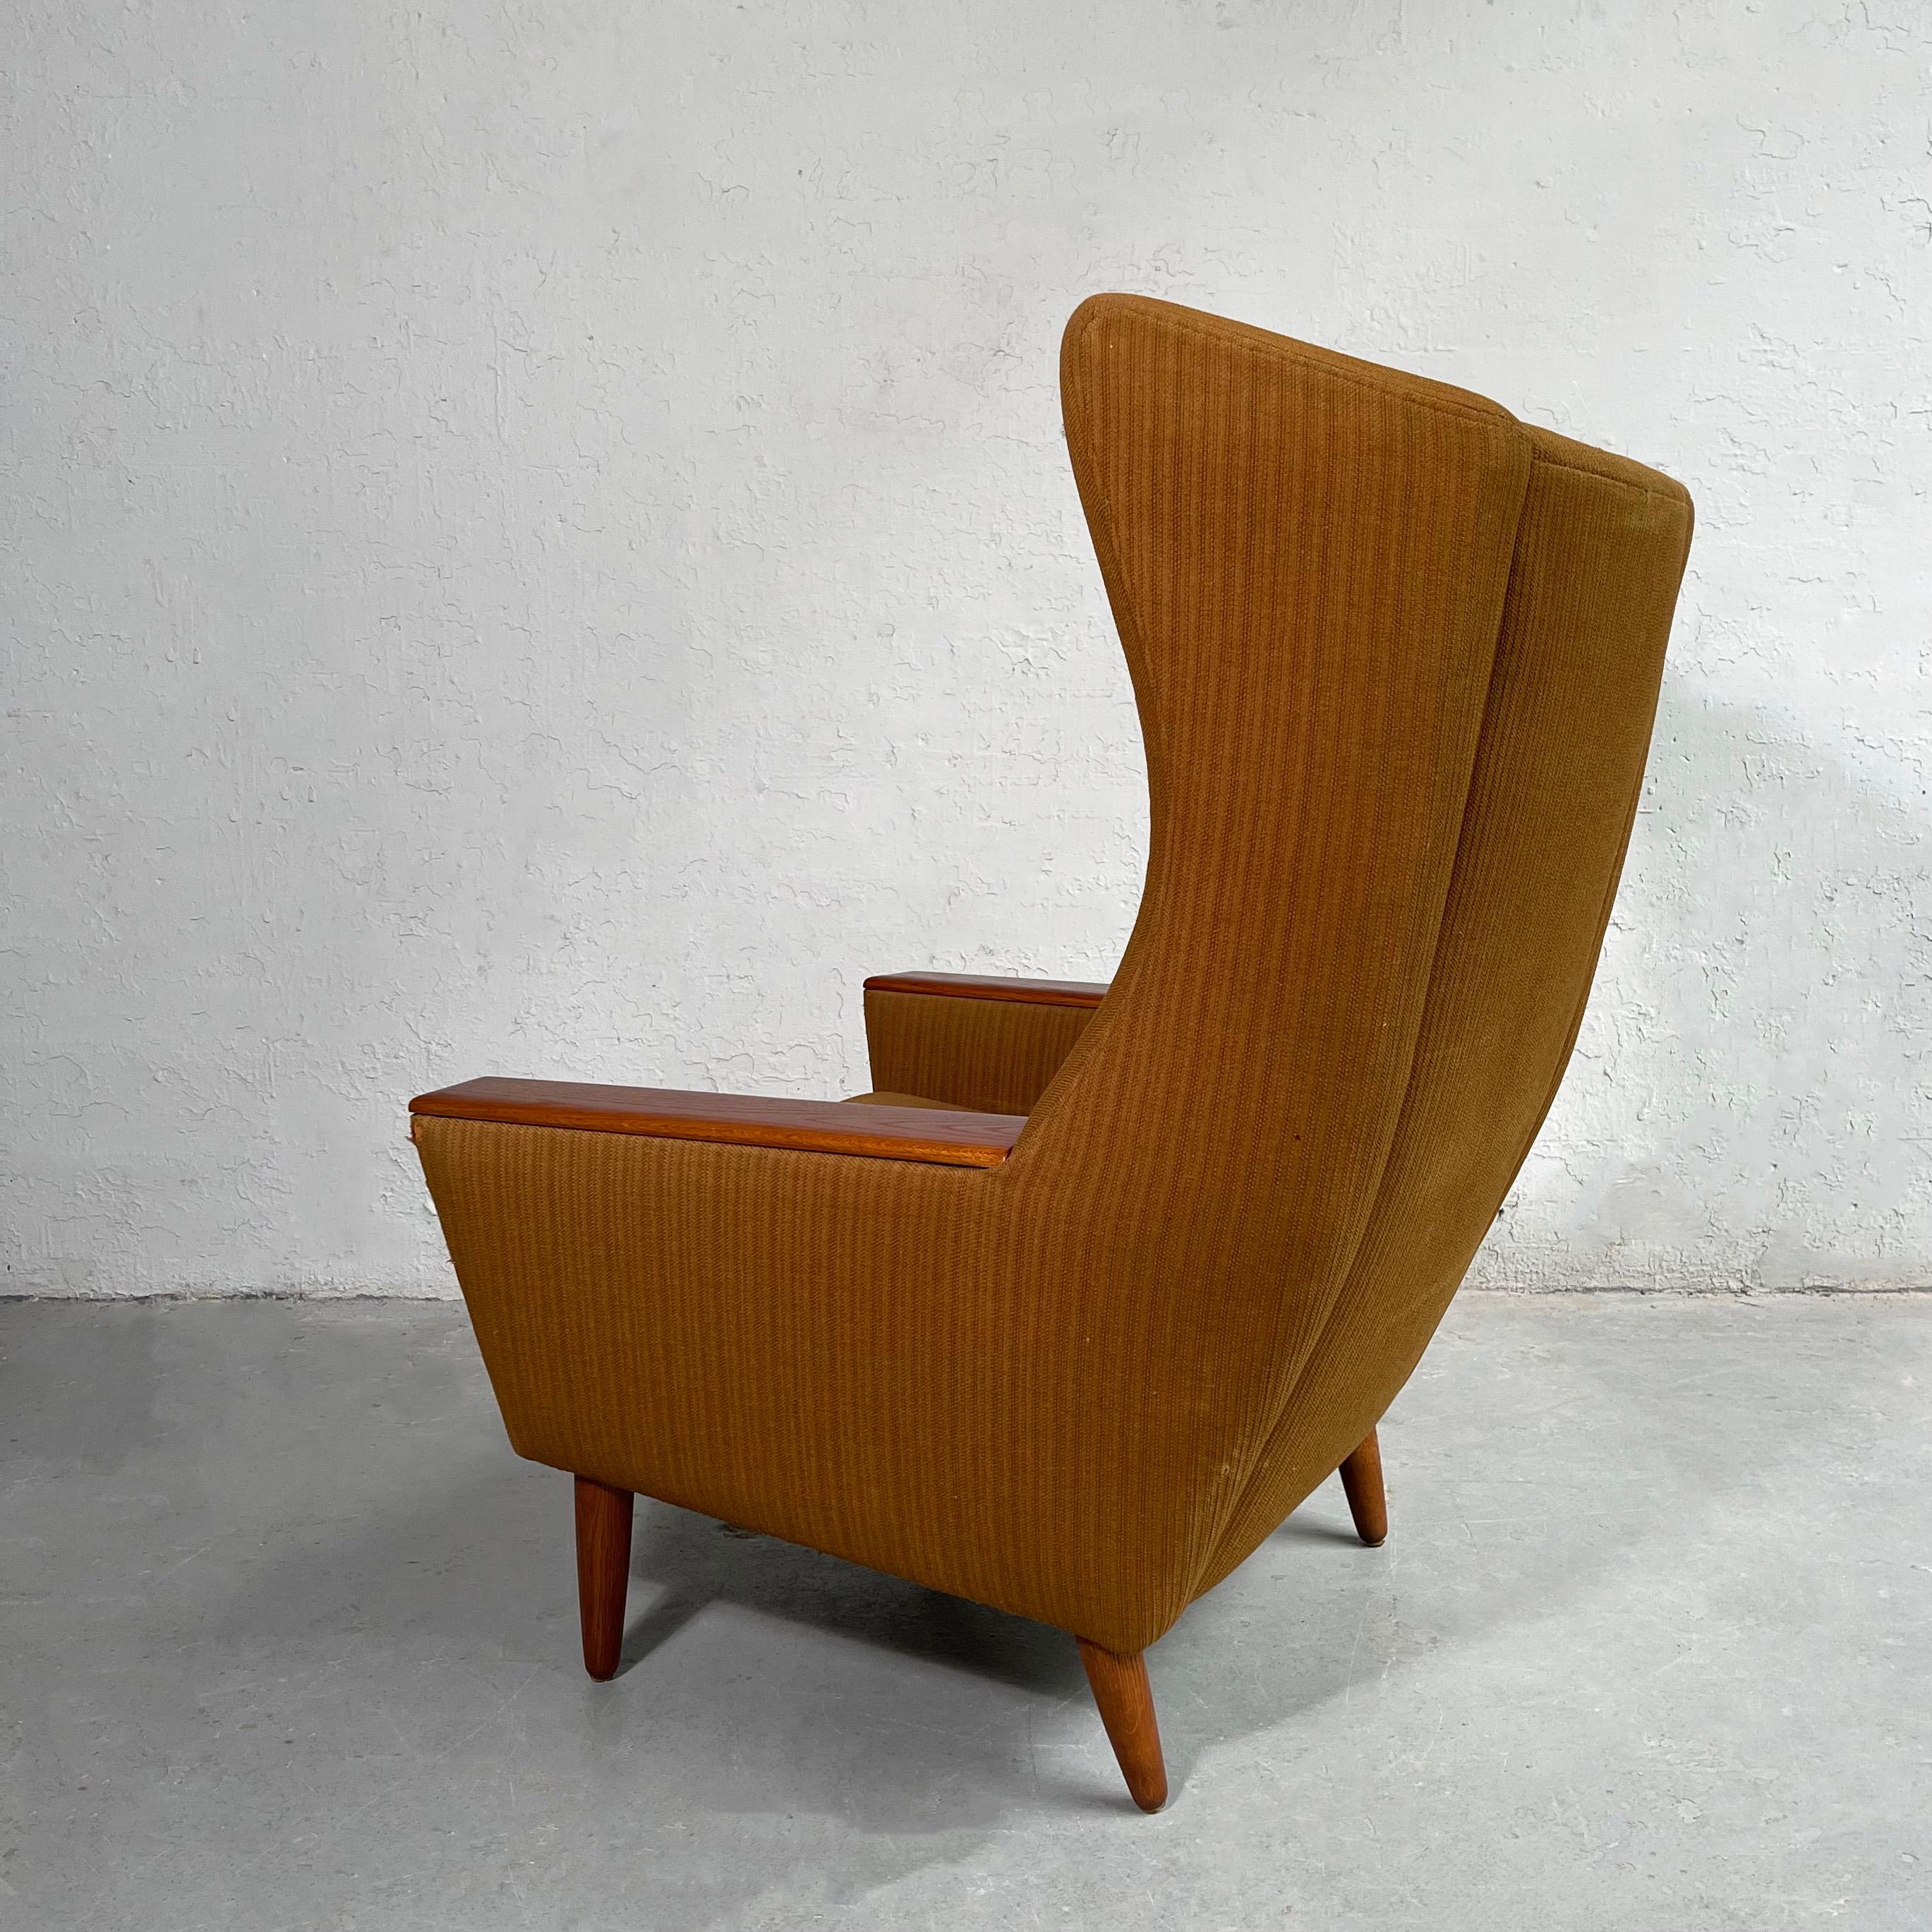 Mid Century Modern Wingback Lounge Chair im Zustand „Gut“ im Angebot in Brooklyn, NY